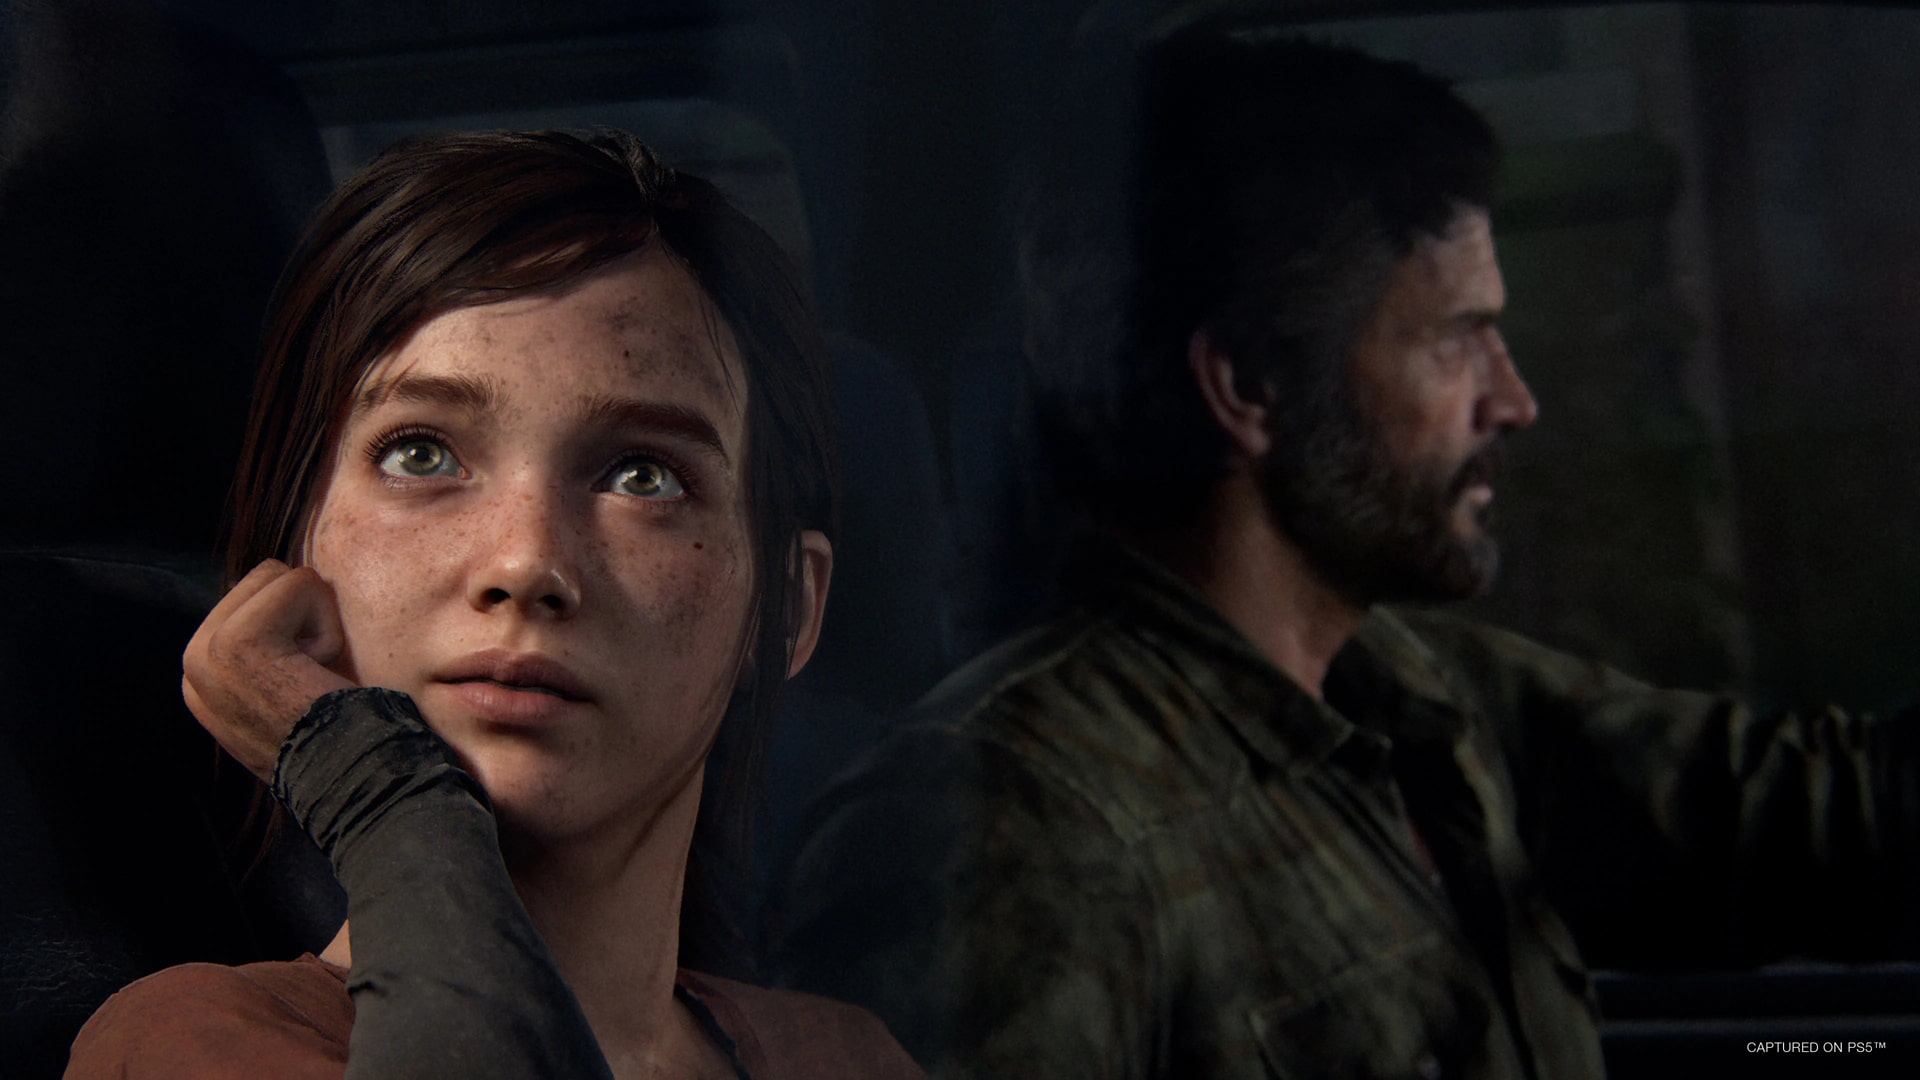 Promotional artwork for 'The Last of Us Part 1' featuring the main characters in a post-apocalyptic setting